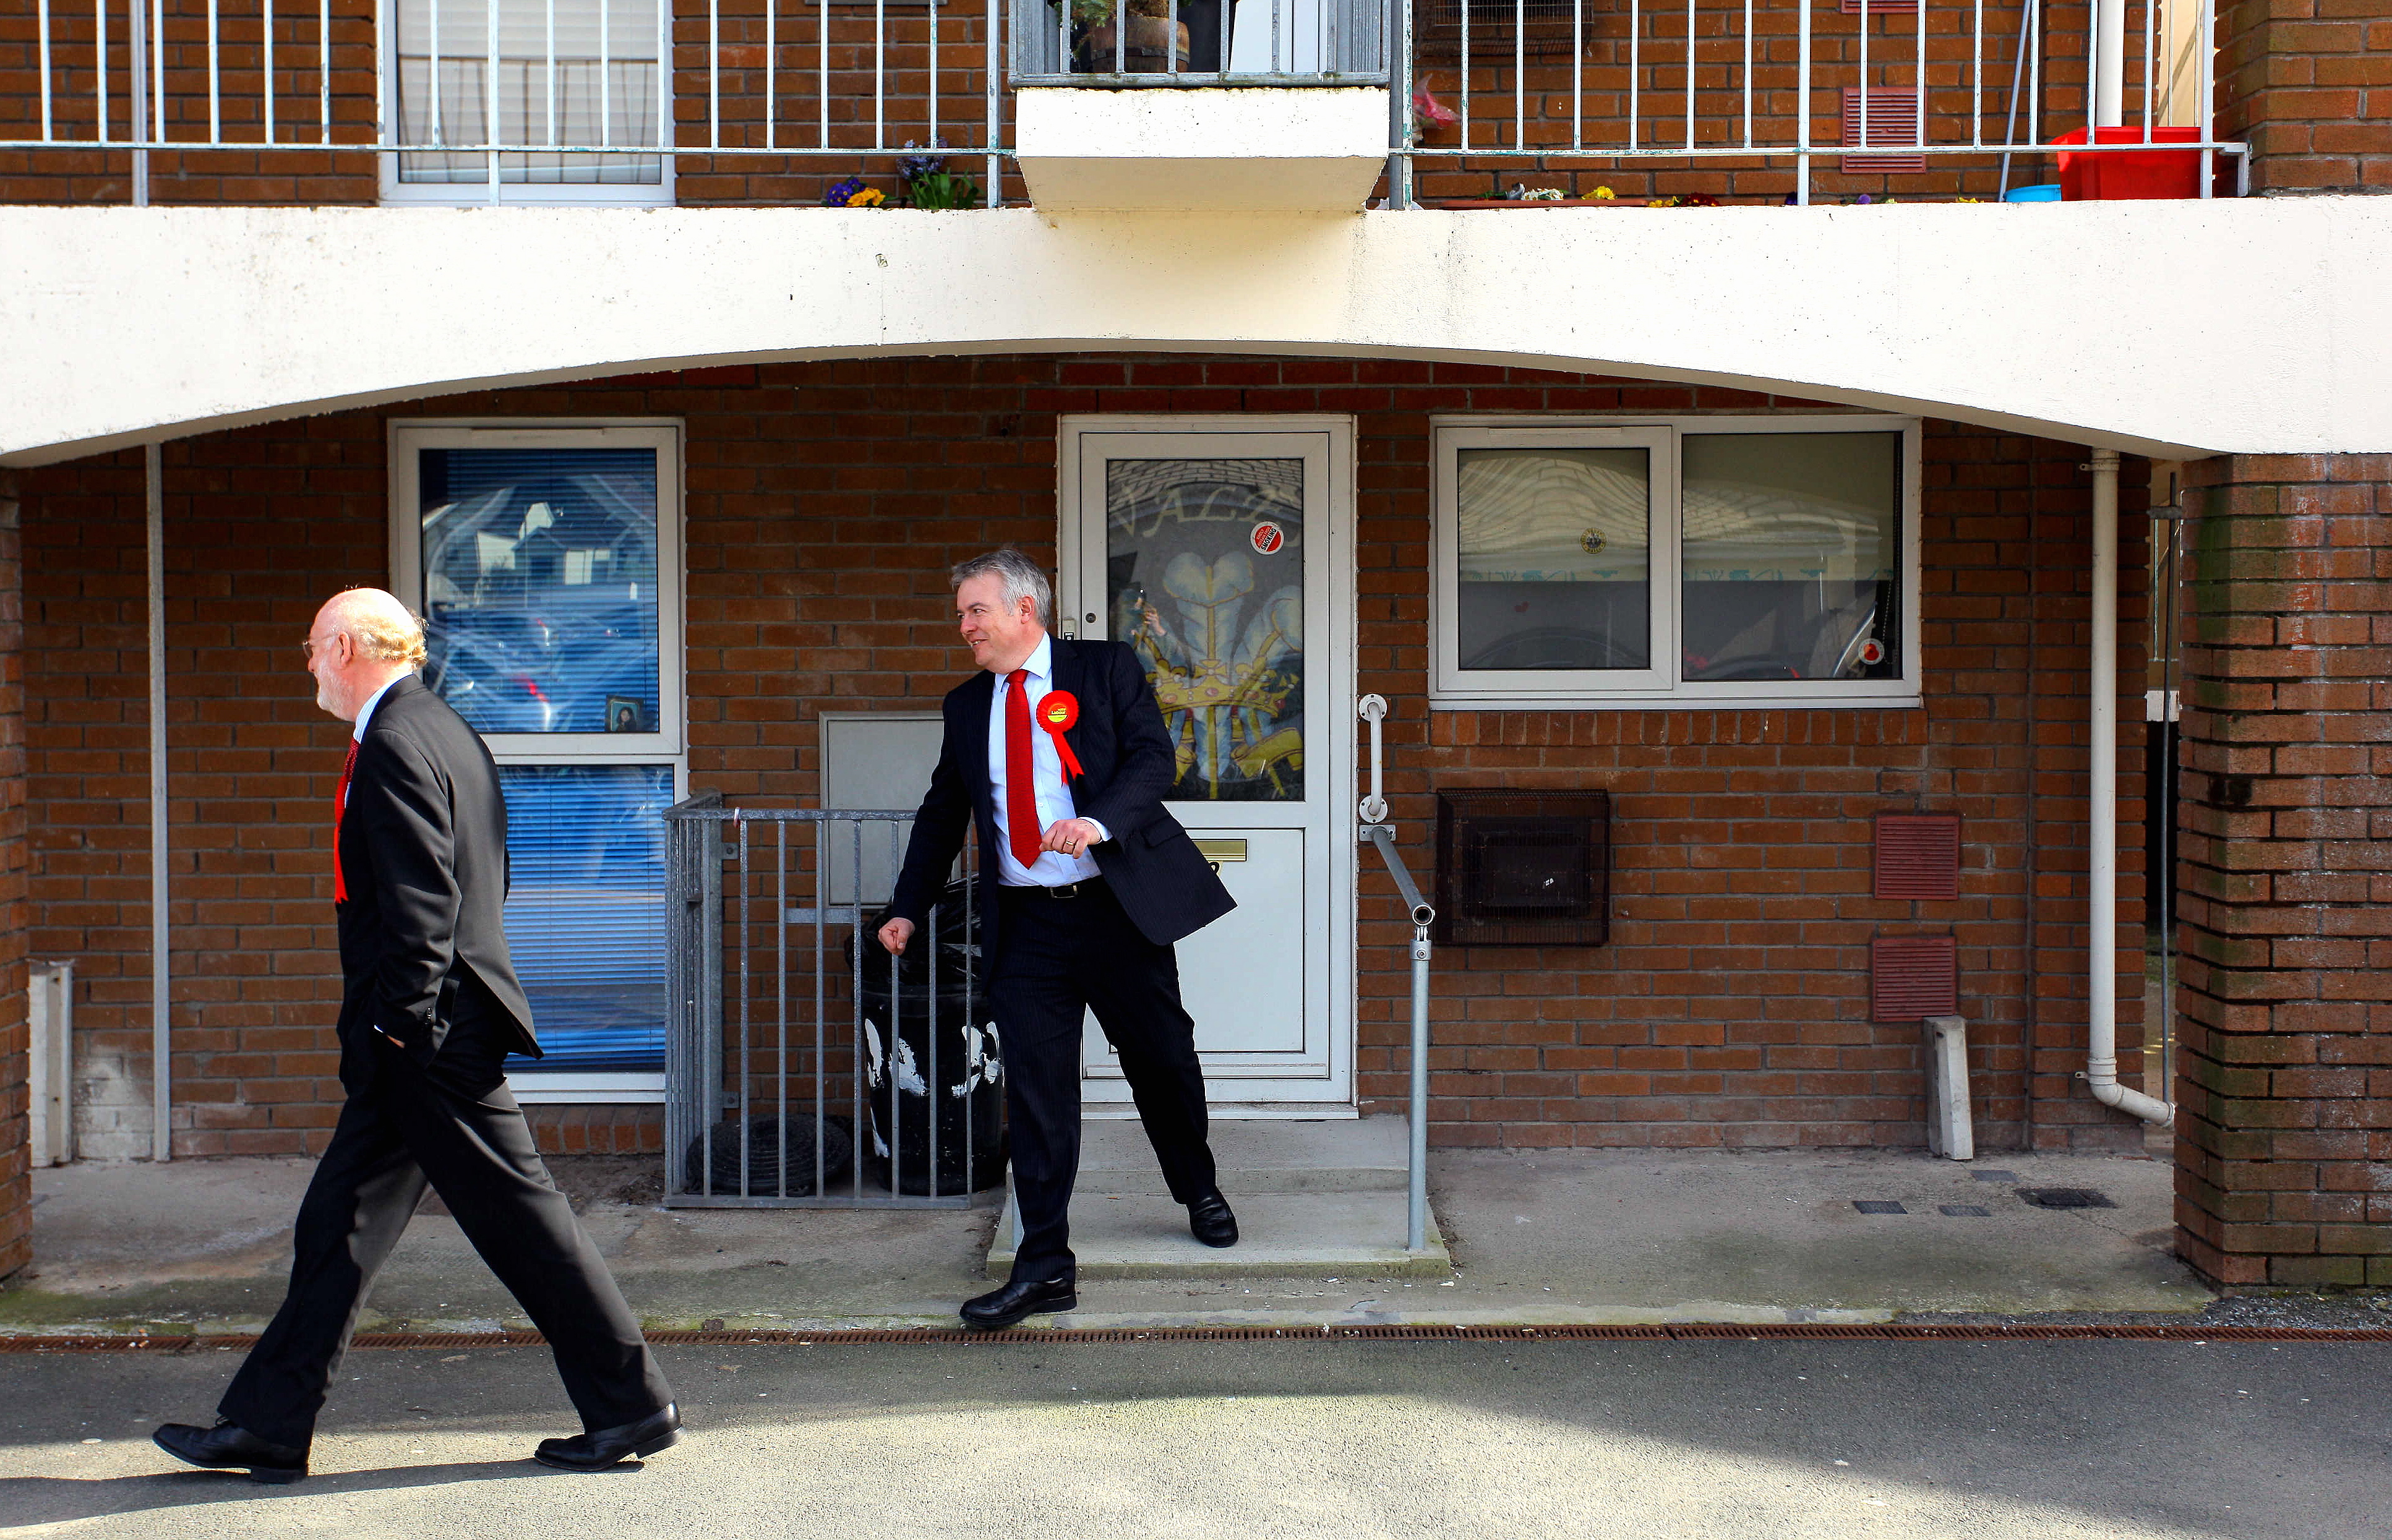 Pictured: Carwyn Jones (R) with Nick Ainger (L) coming out of a flat they just canvassed Re: First Minister for Wales Carwyn Jones canvassing in Carmarthen west Wales with Nick Ainger. Thursday 08 April 2010